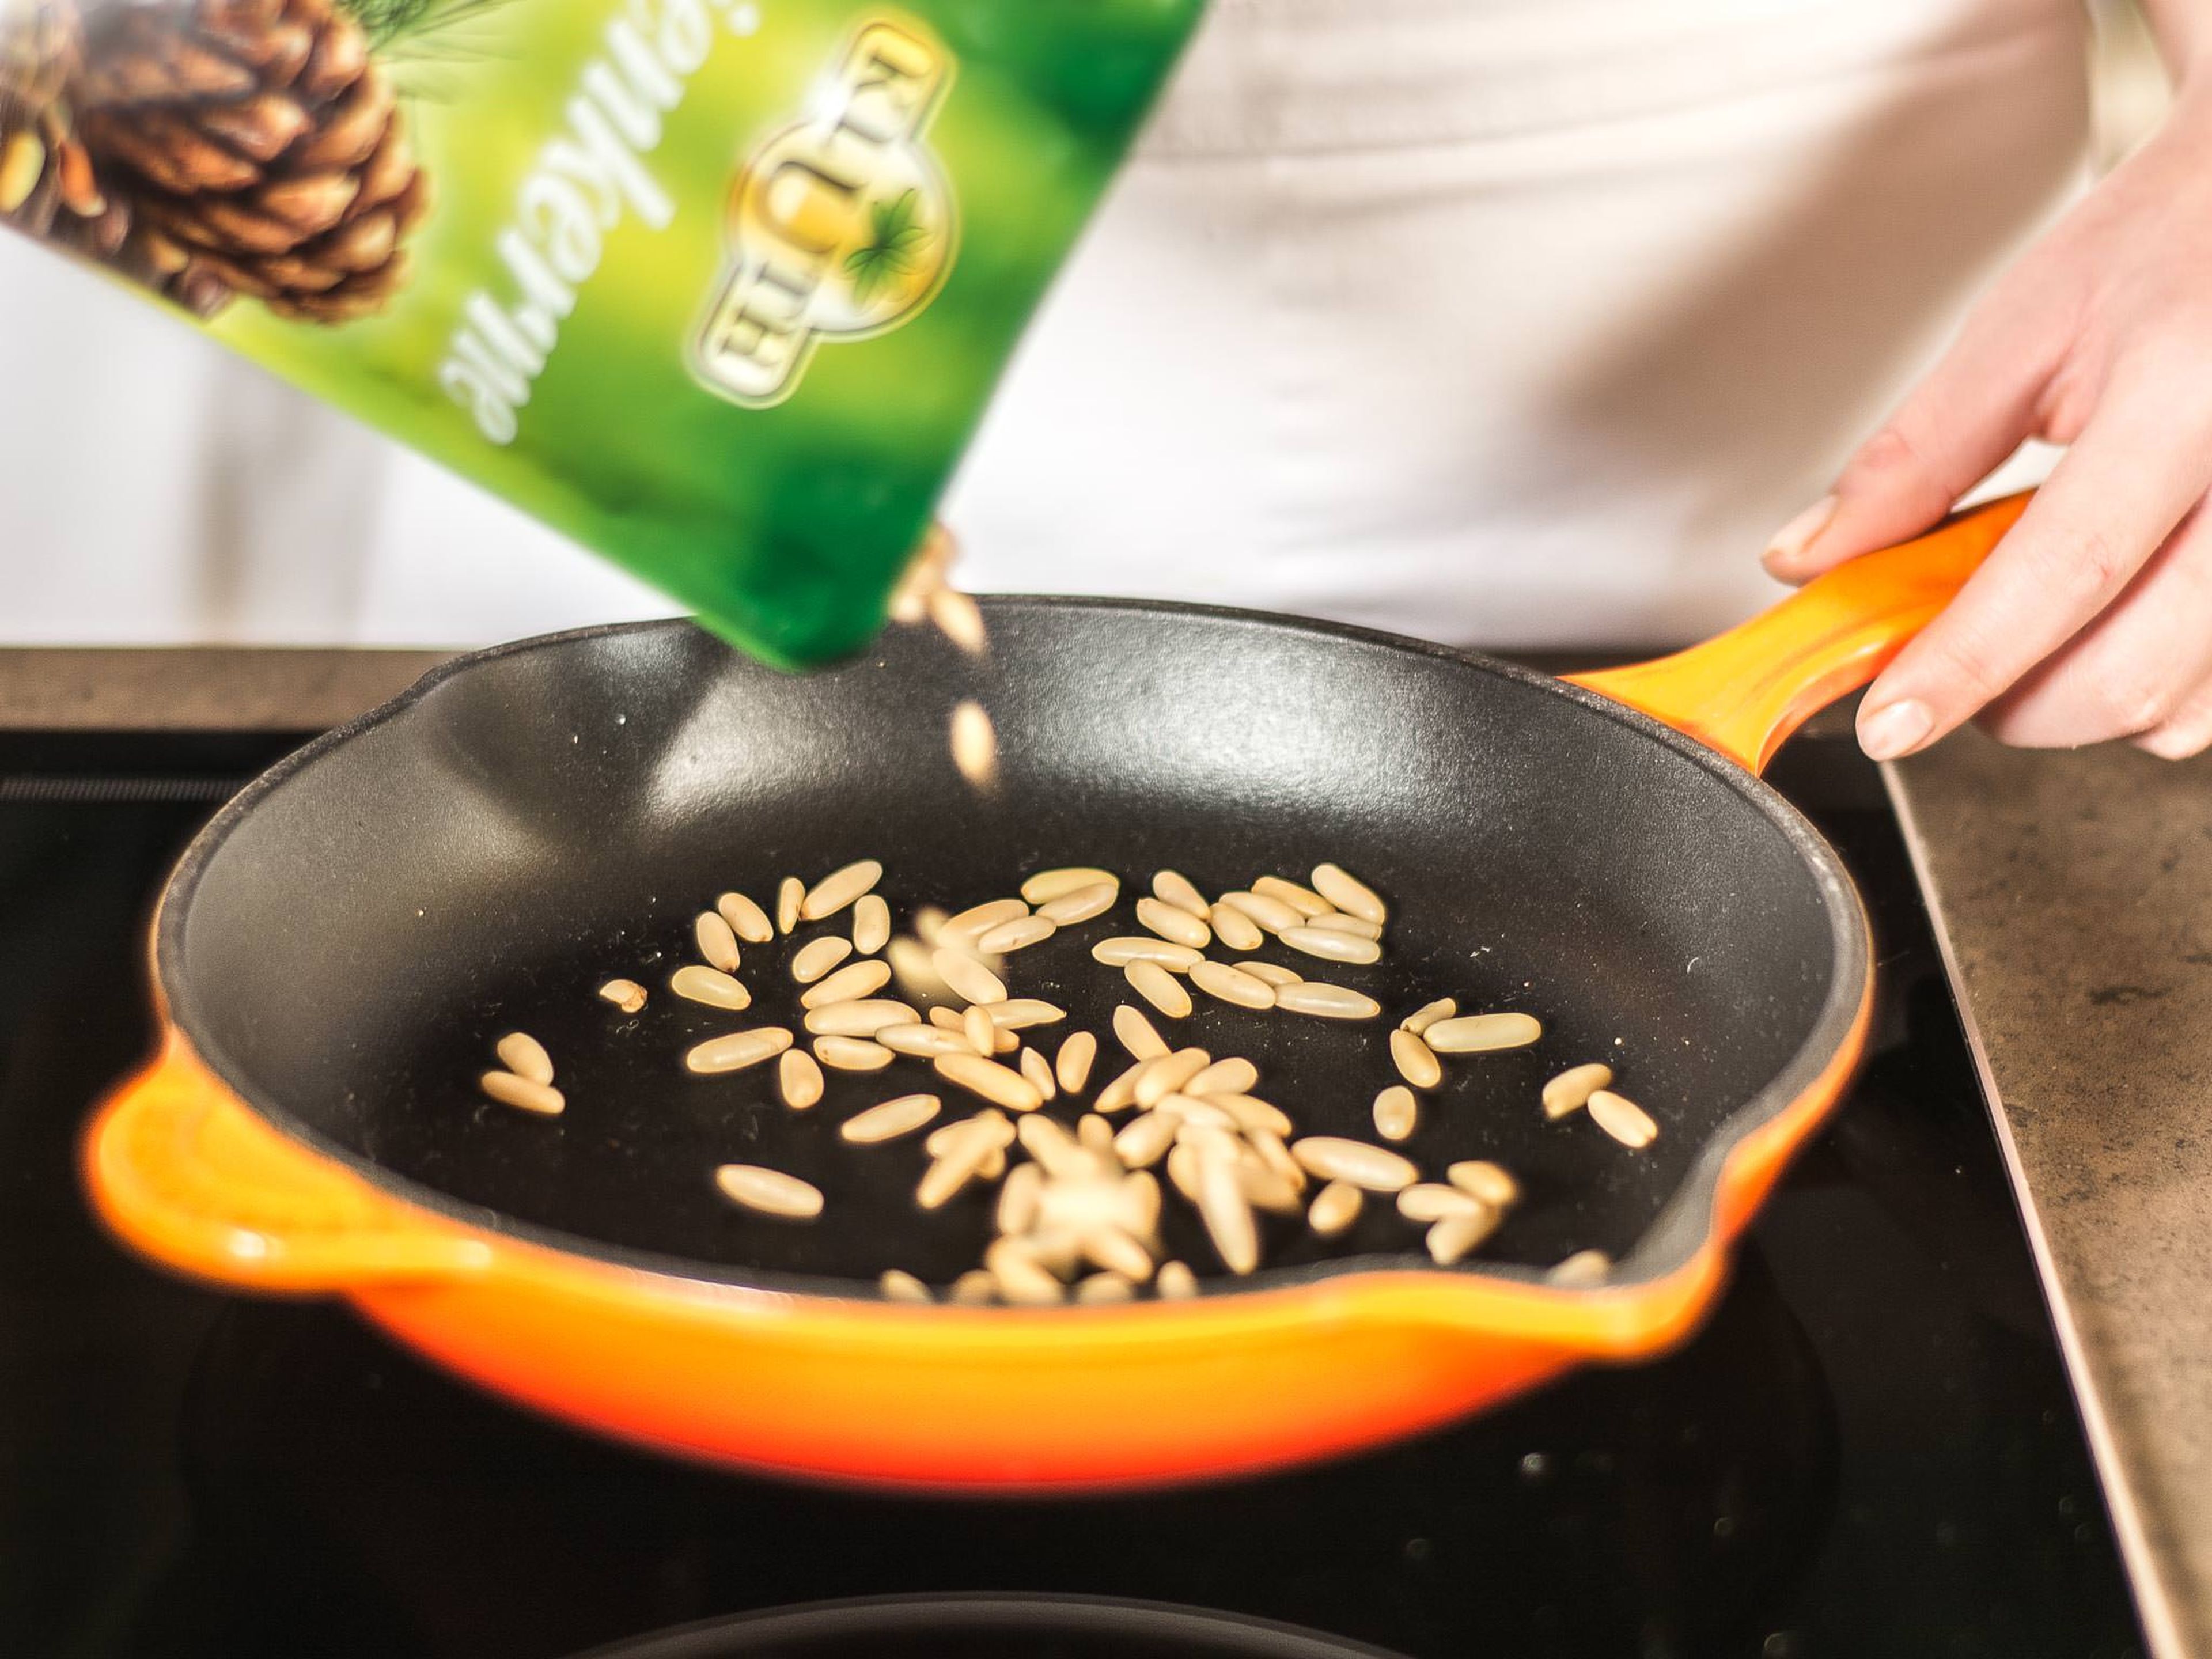 In the meantime, roast pine nuts in a small frying pan until brown, then finely chop them.